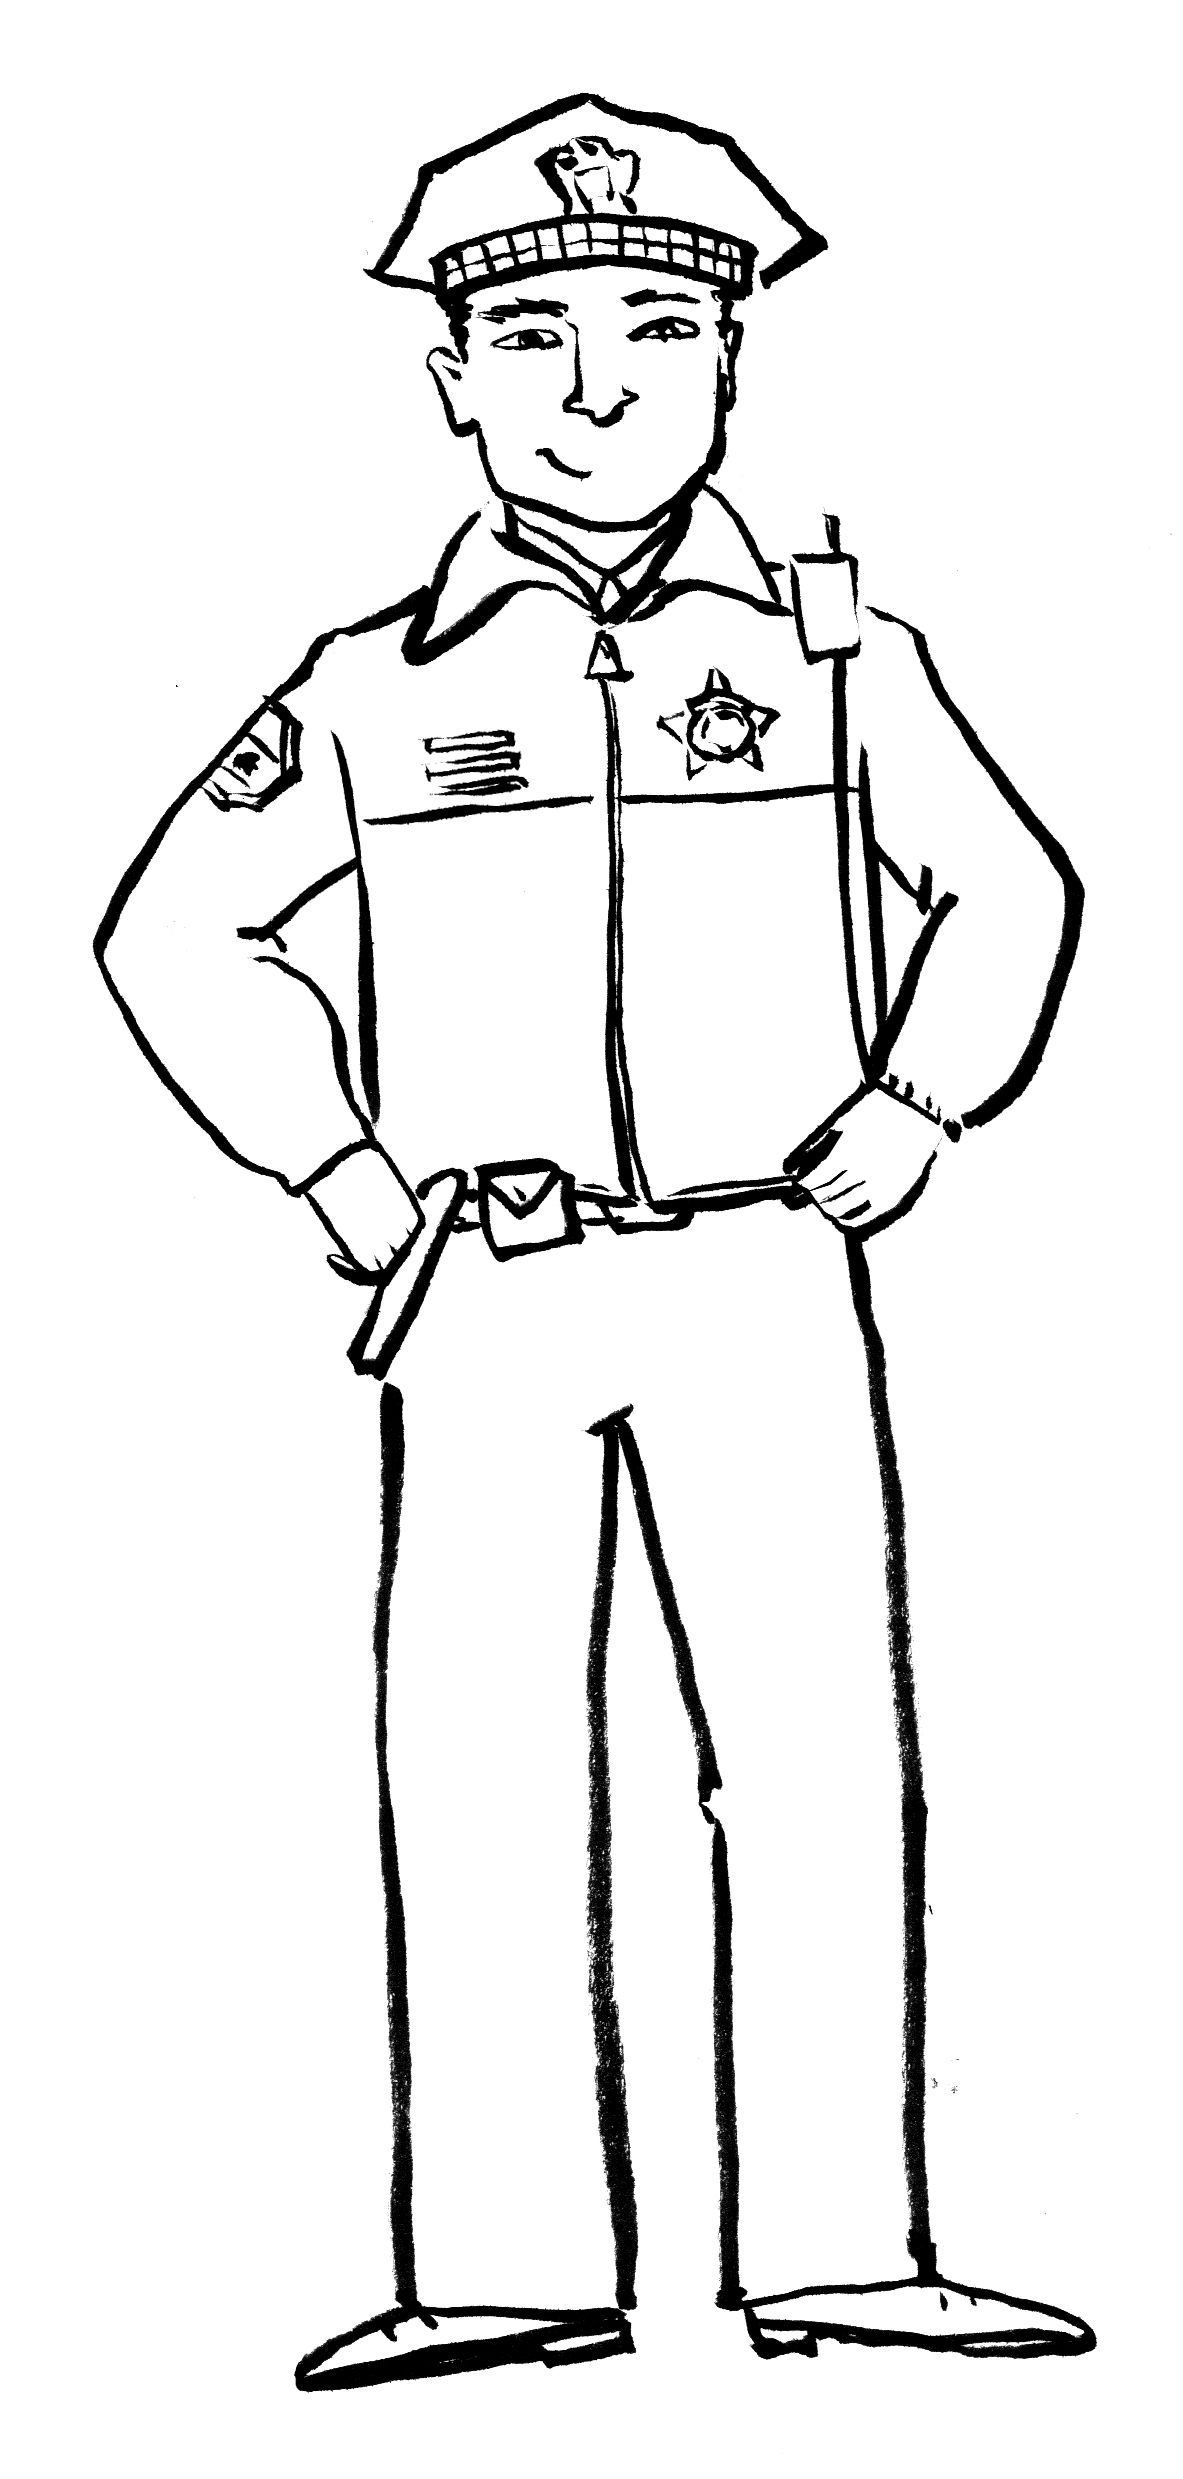 Policeman Drawing - Free Clipart Images